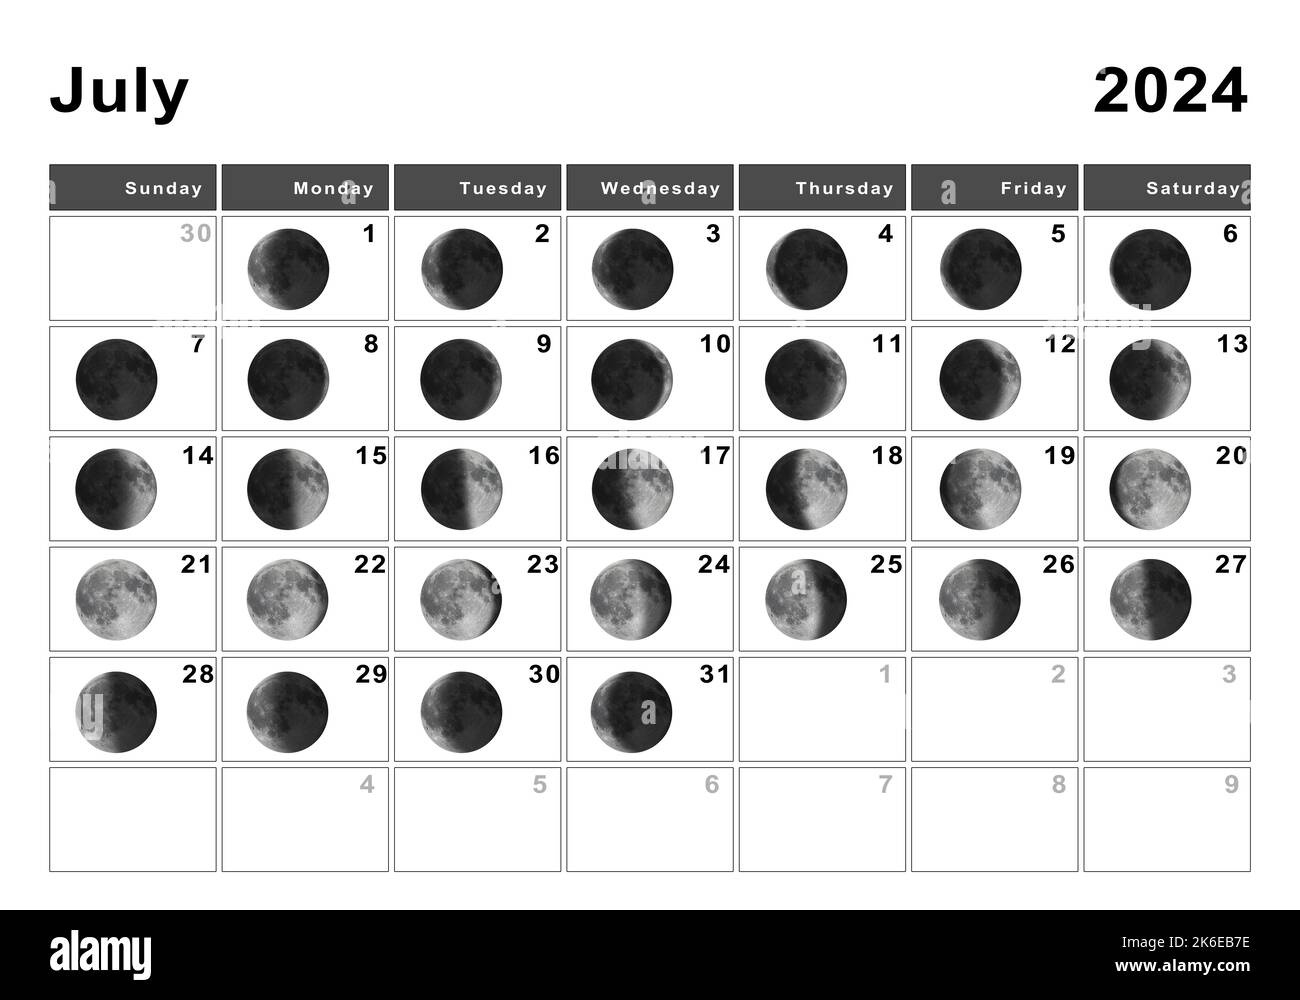 July 2024 Lunar Calendar, Moon Cycles, Moon Phases Stock Photo - Alamy throughout Moon Phases Calendar July 2024